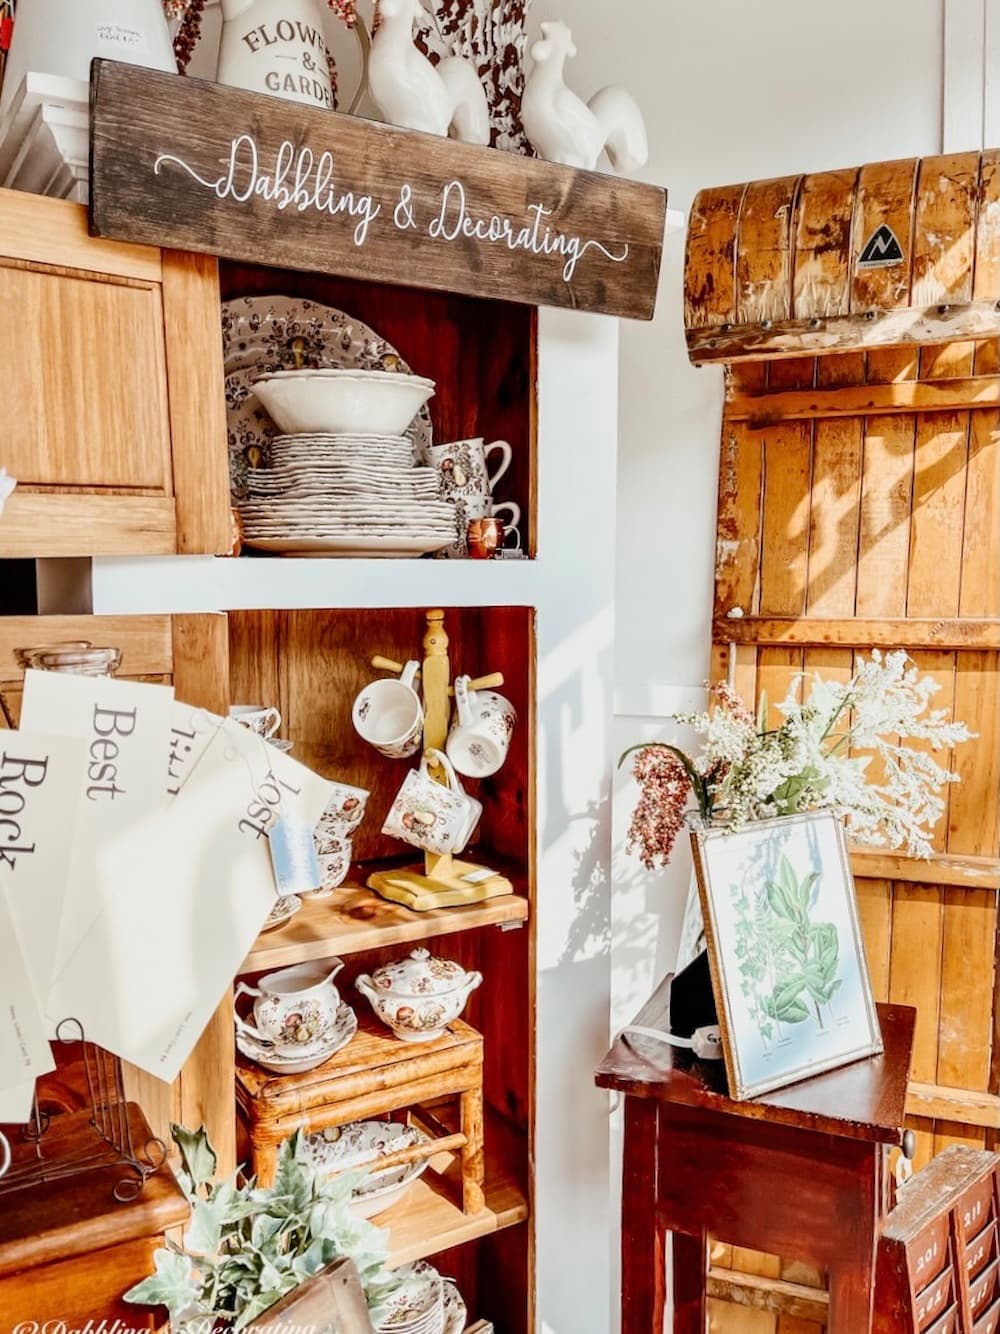 How to Start a Vintage Booth Business